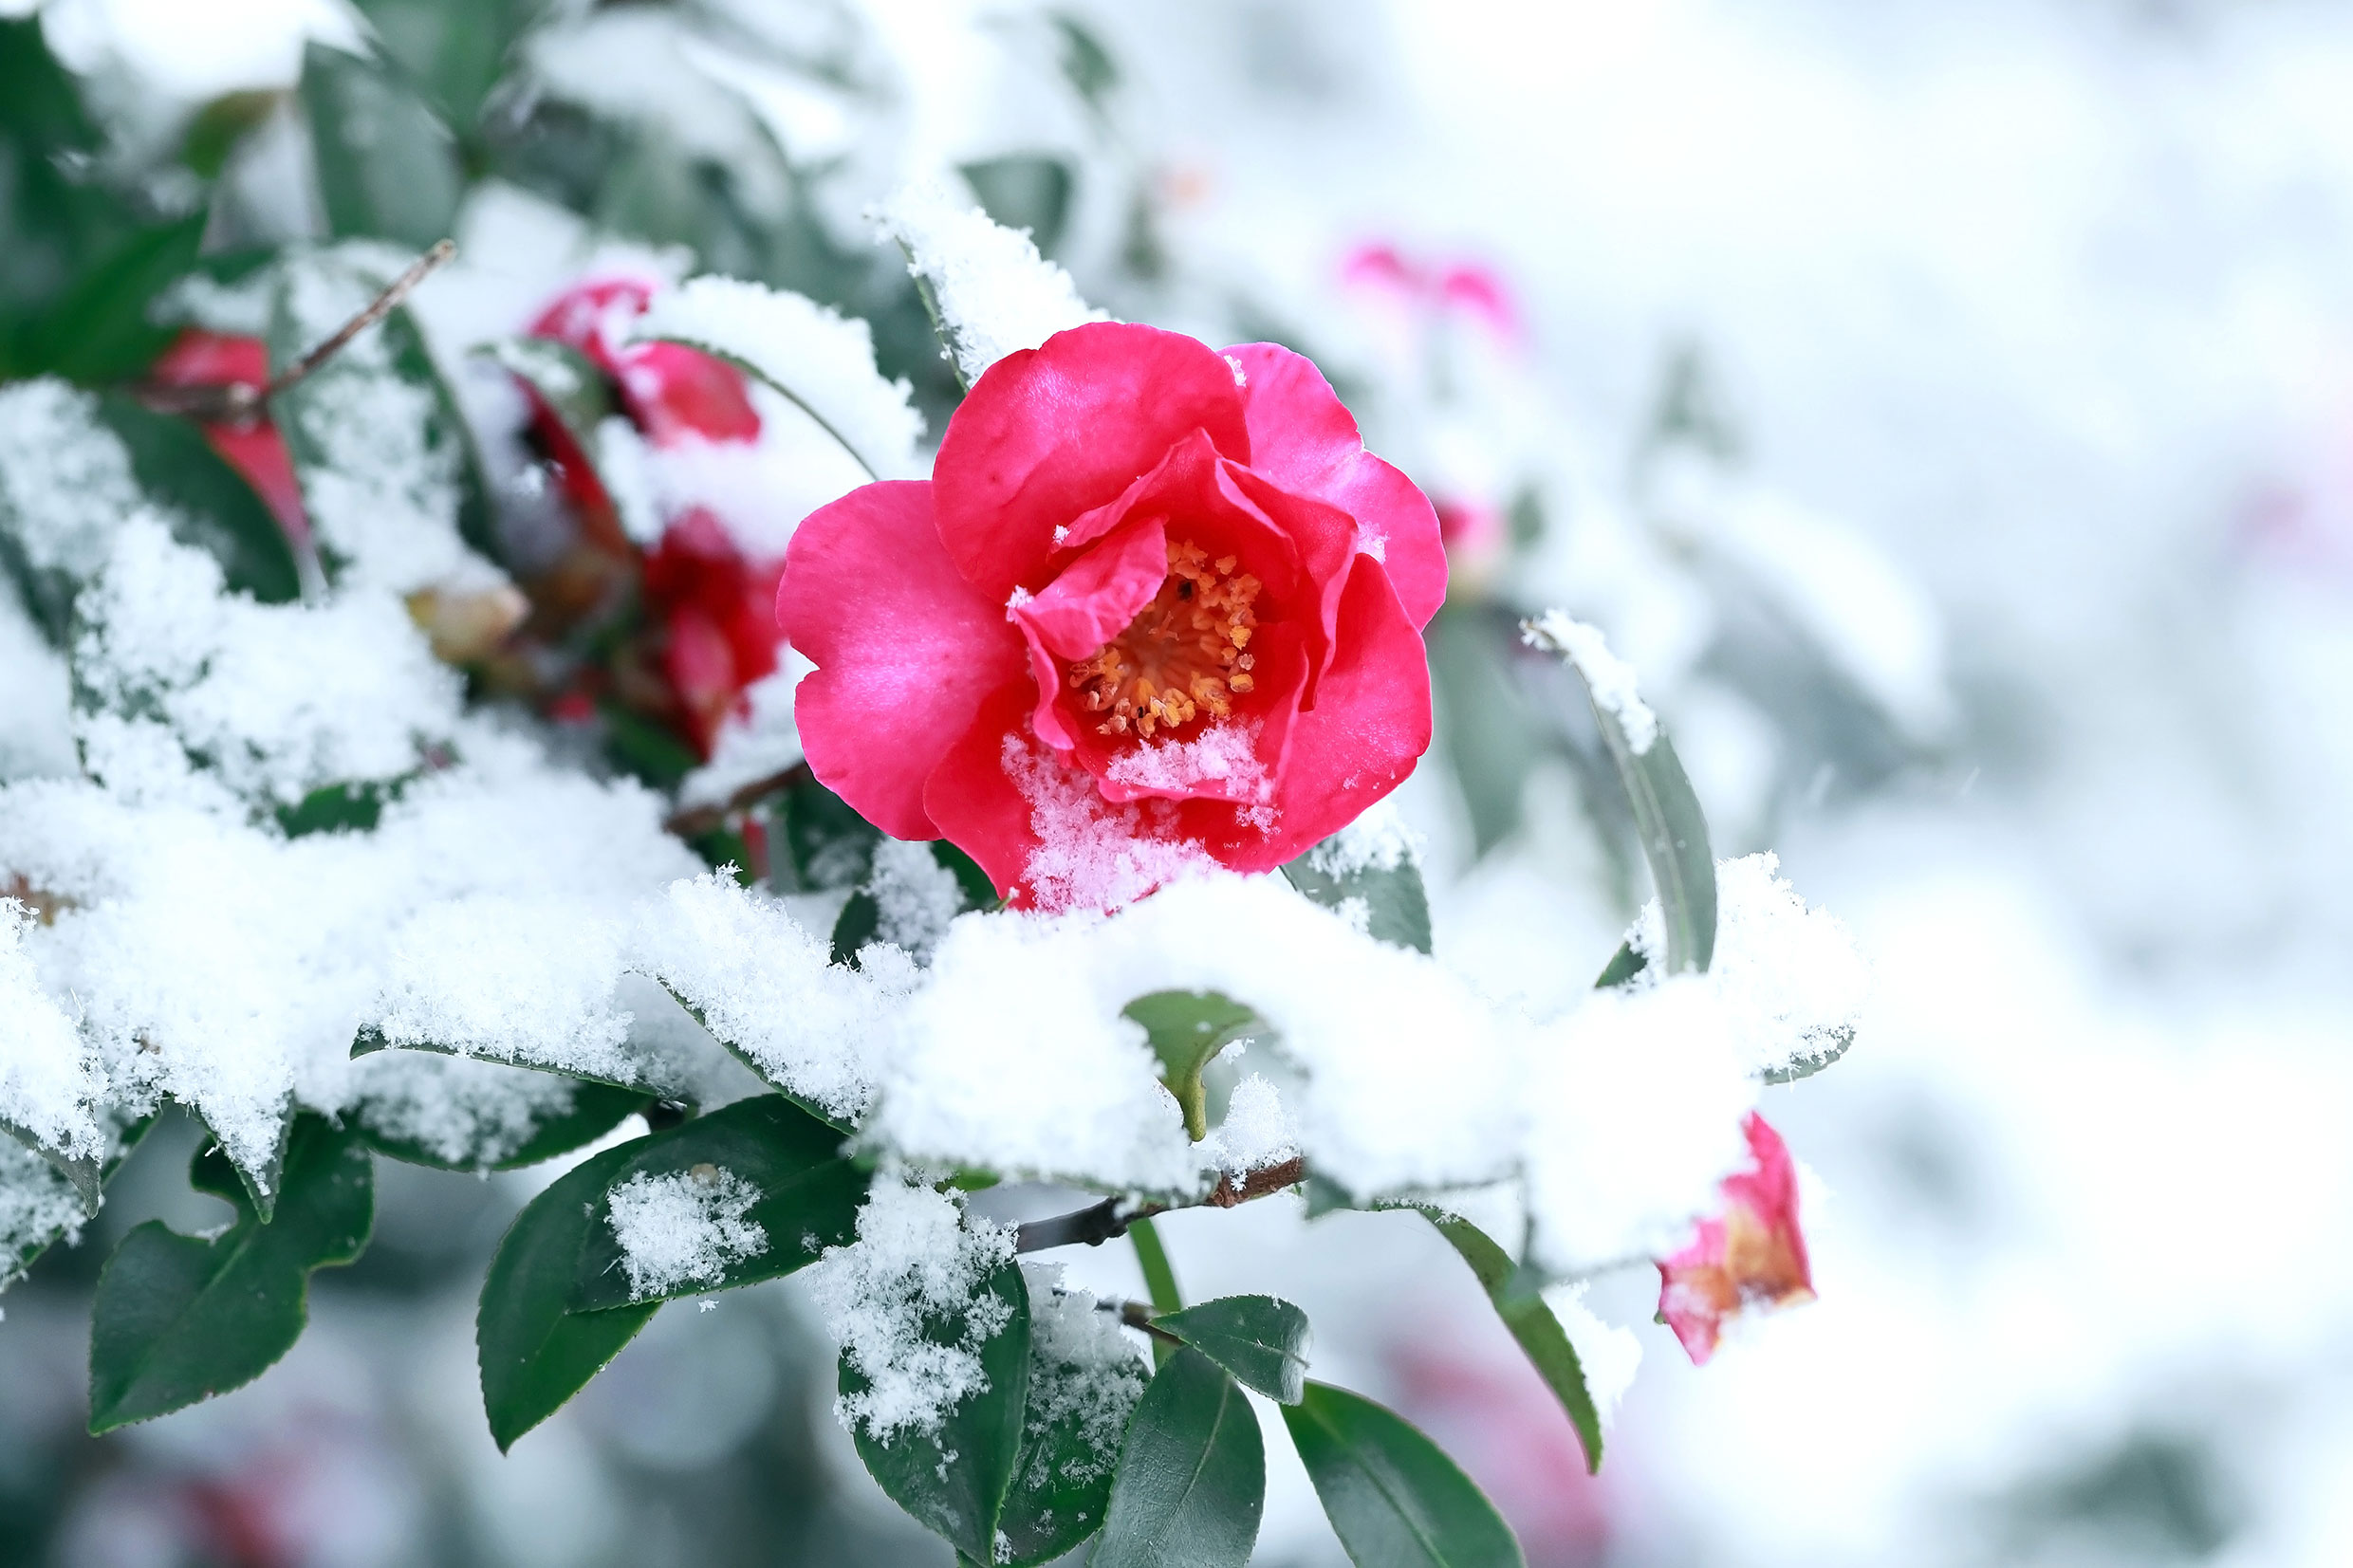 195001_Shutterstock_2103375035_Camellia-Sasanqua-flowers-blooming-in-the-snow